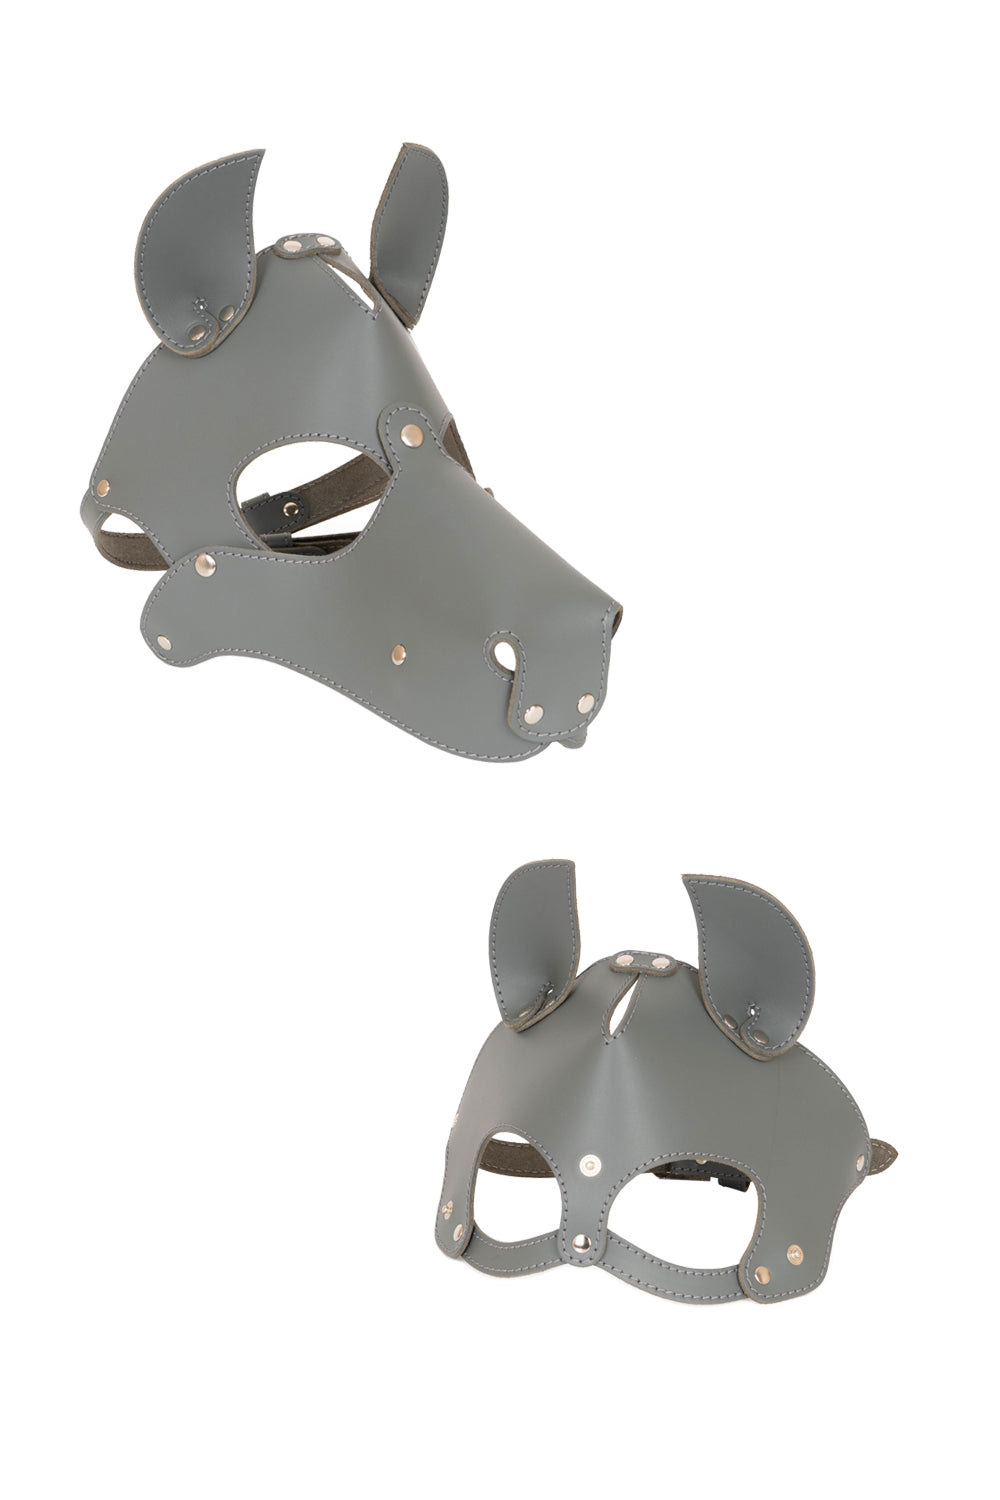 Dog mask with detachable muzzle. Green